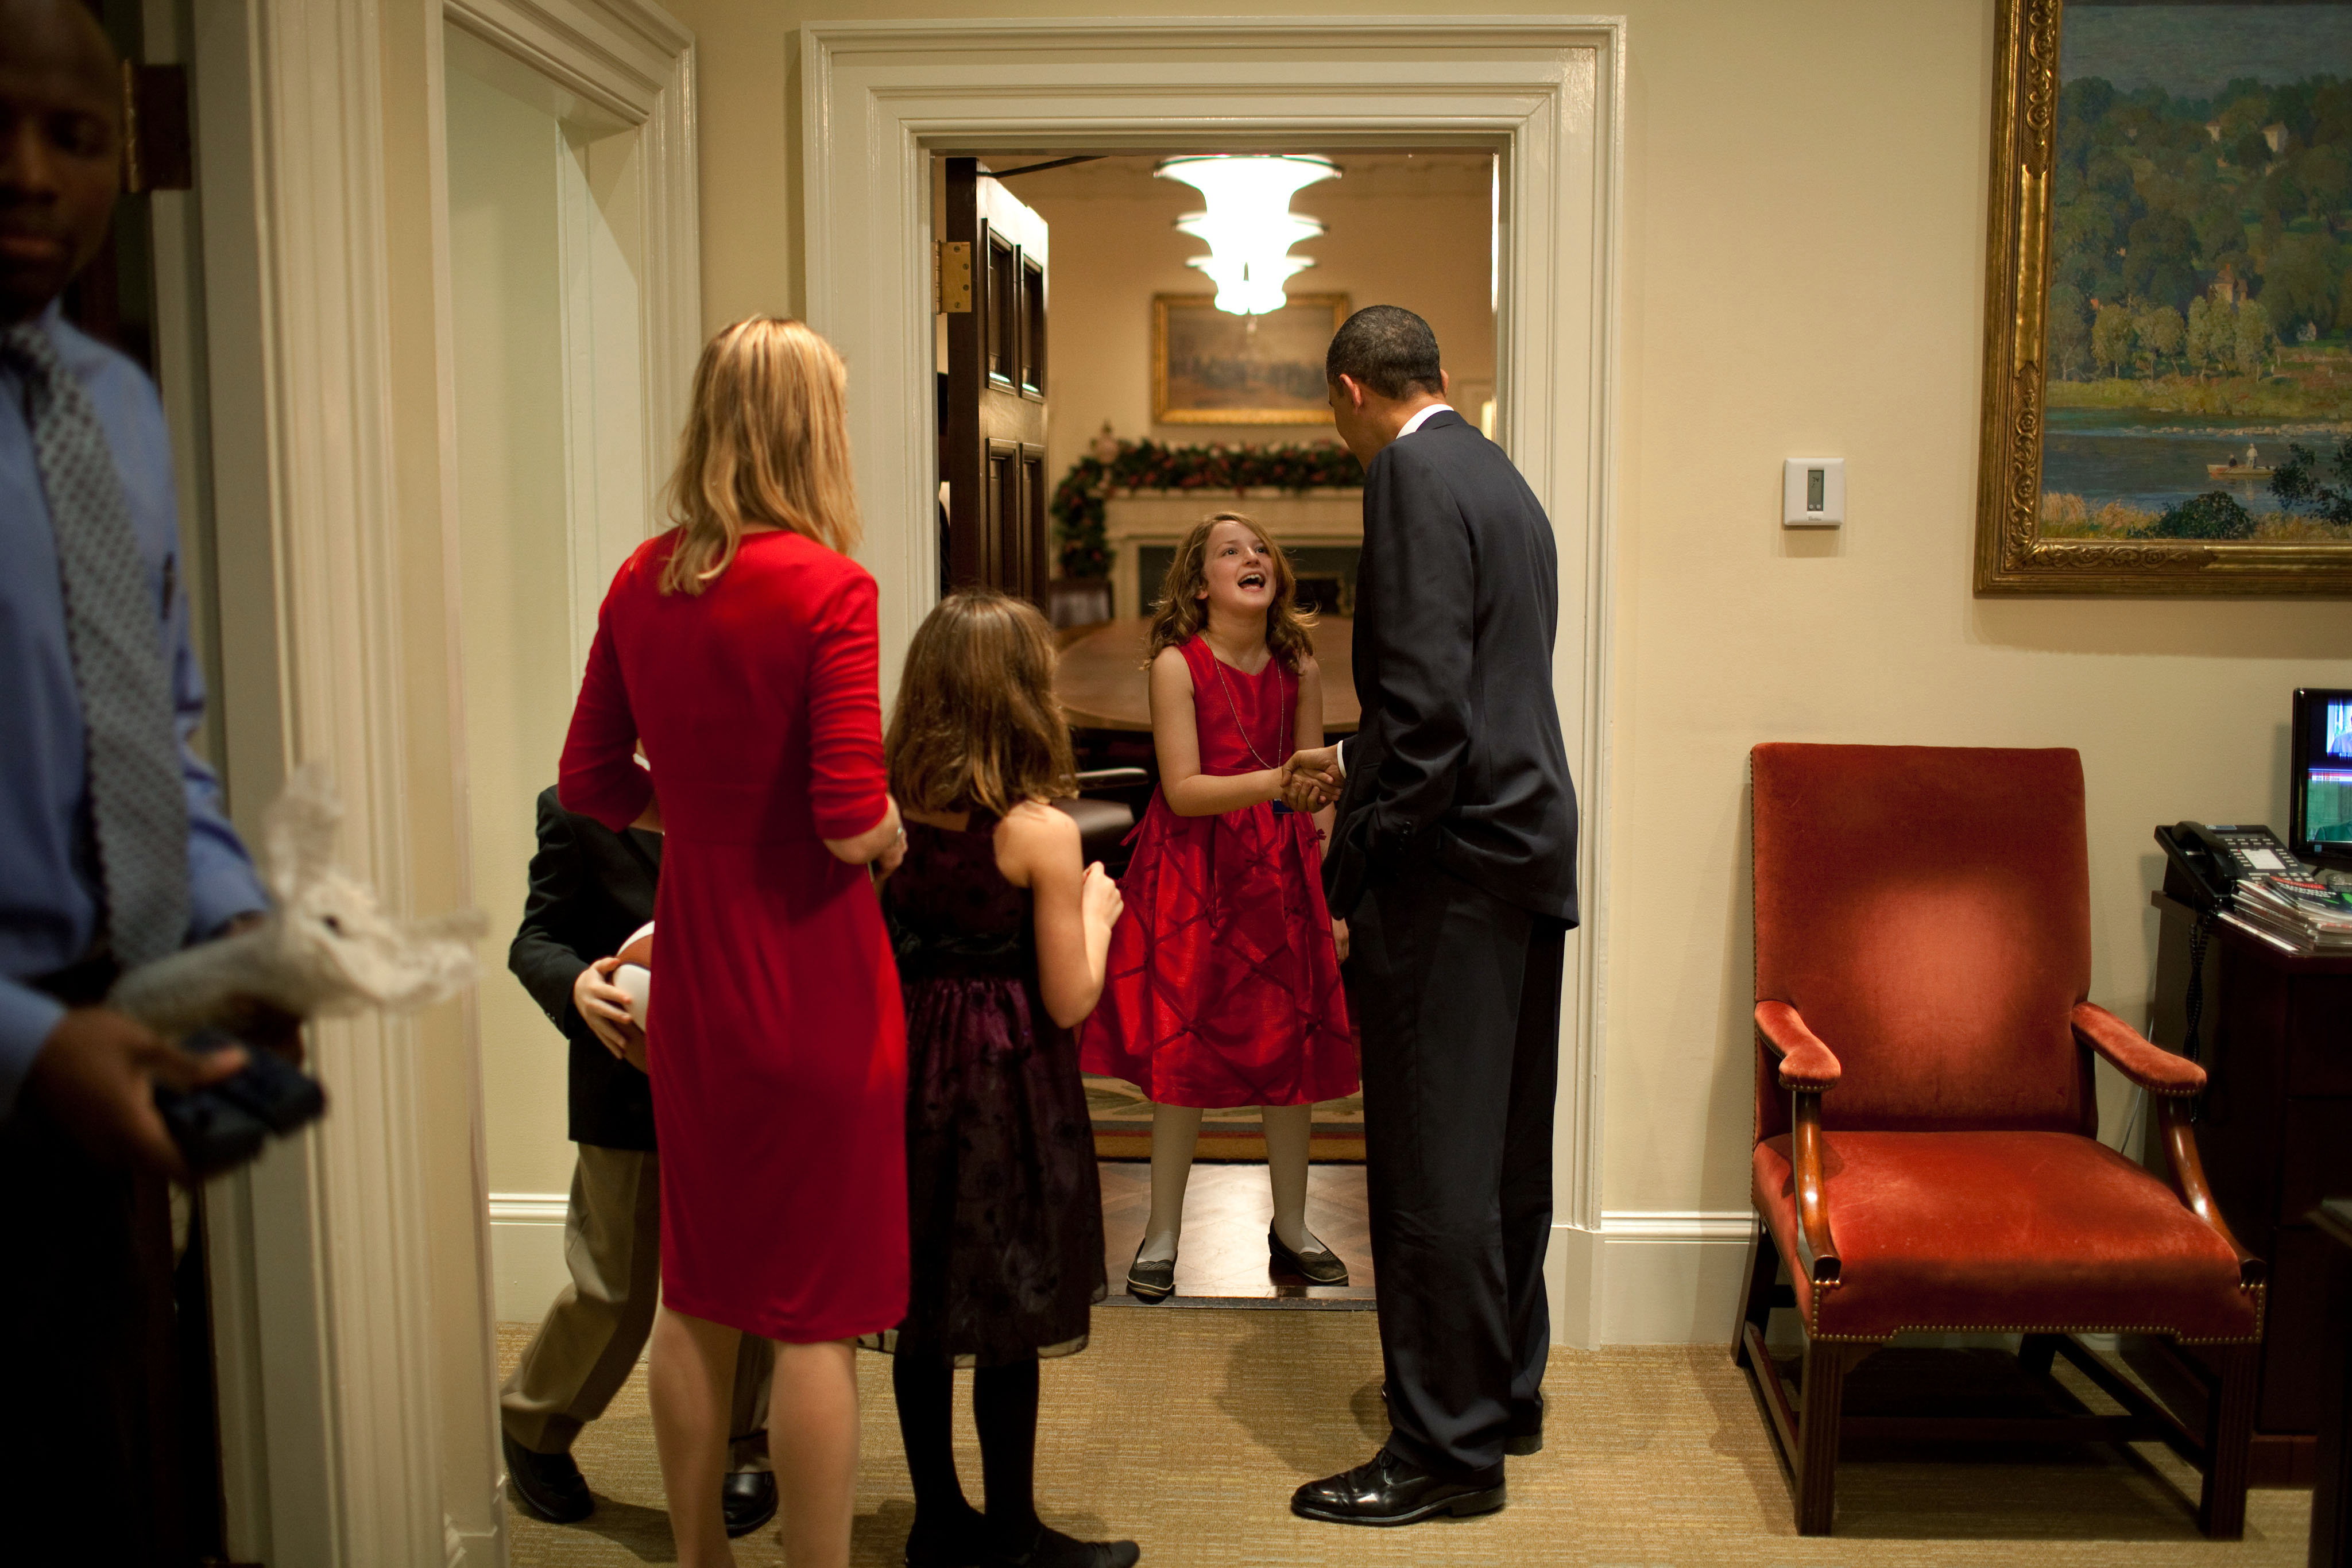 Barack Obama greets a family in the Oval Office secretary office